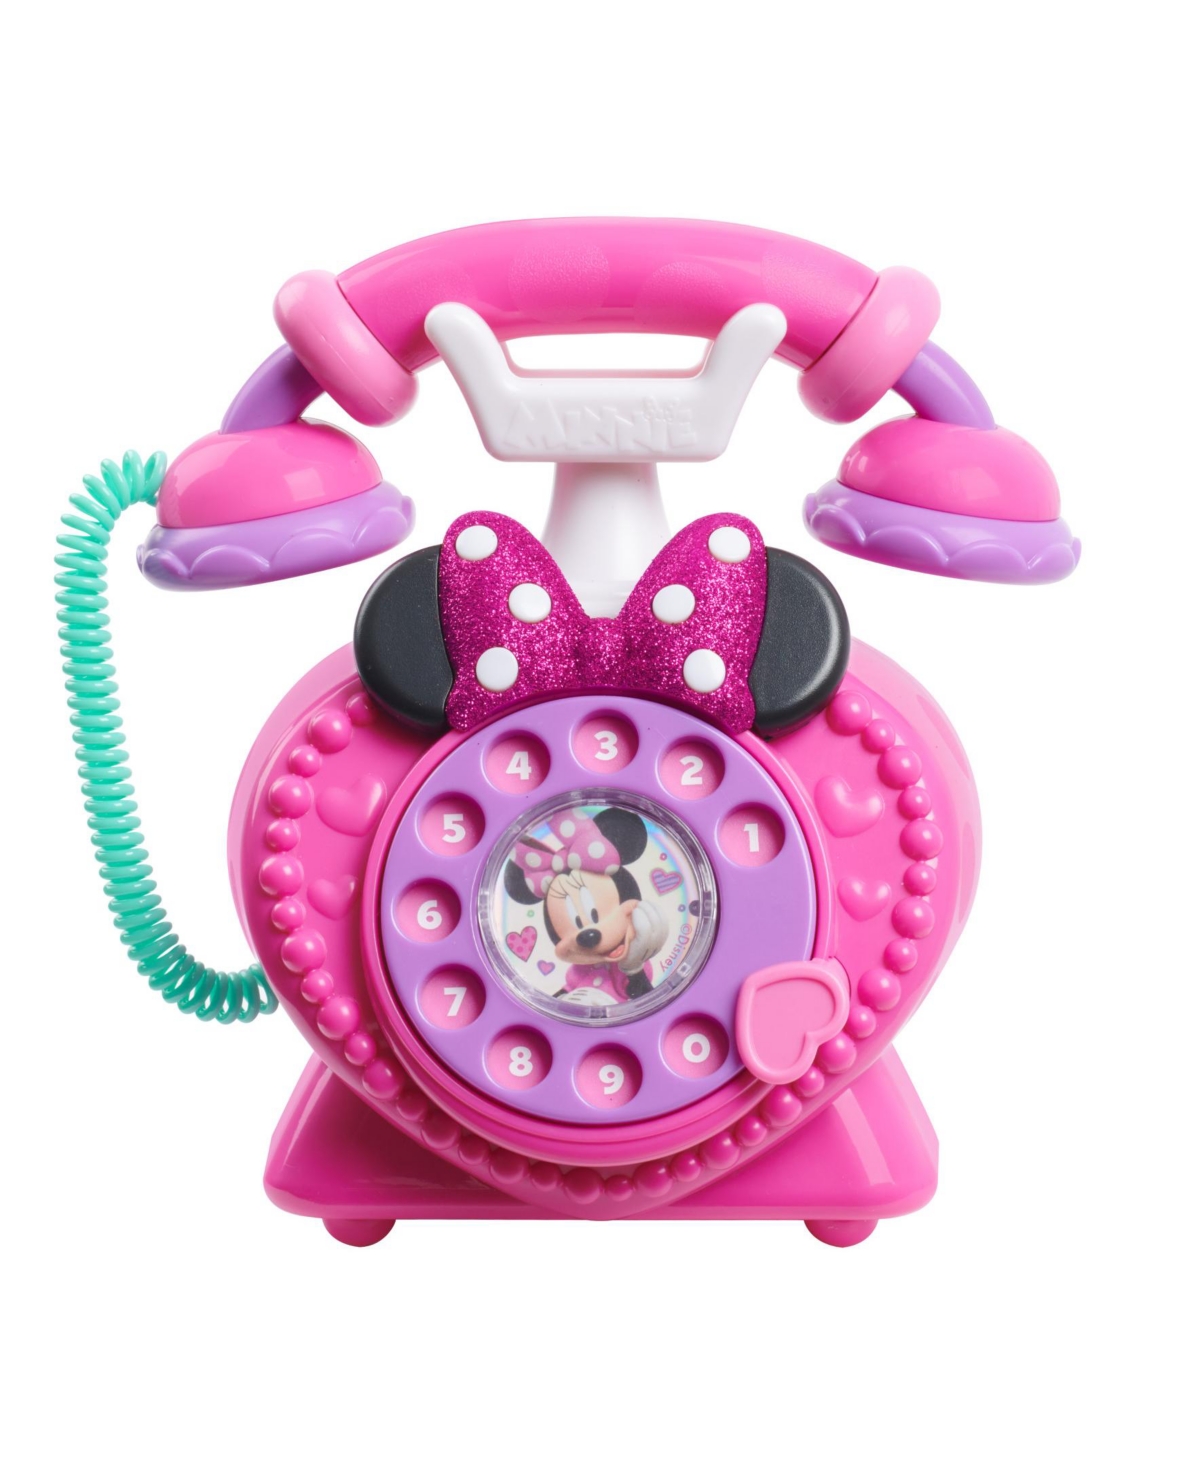 Shop Disney Junior Minnie Mouse Ring Me Rotary Phone With Lights And Sounds In Multi